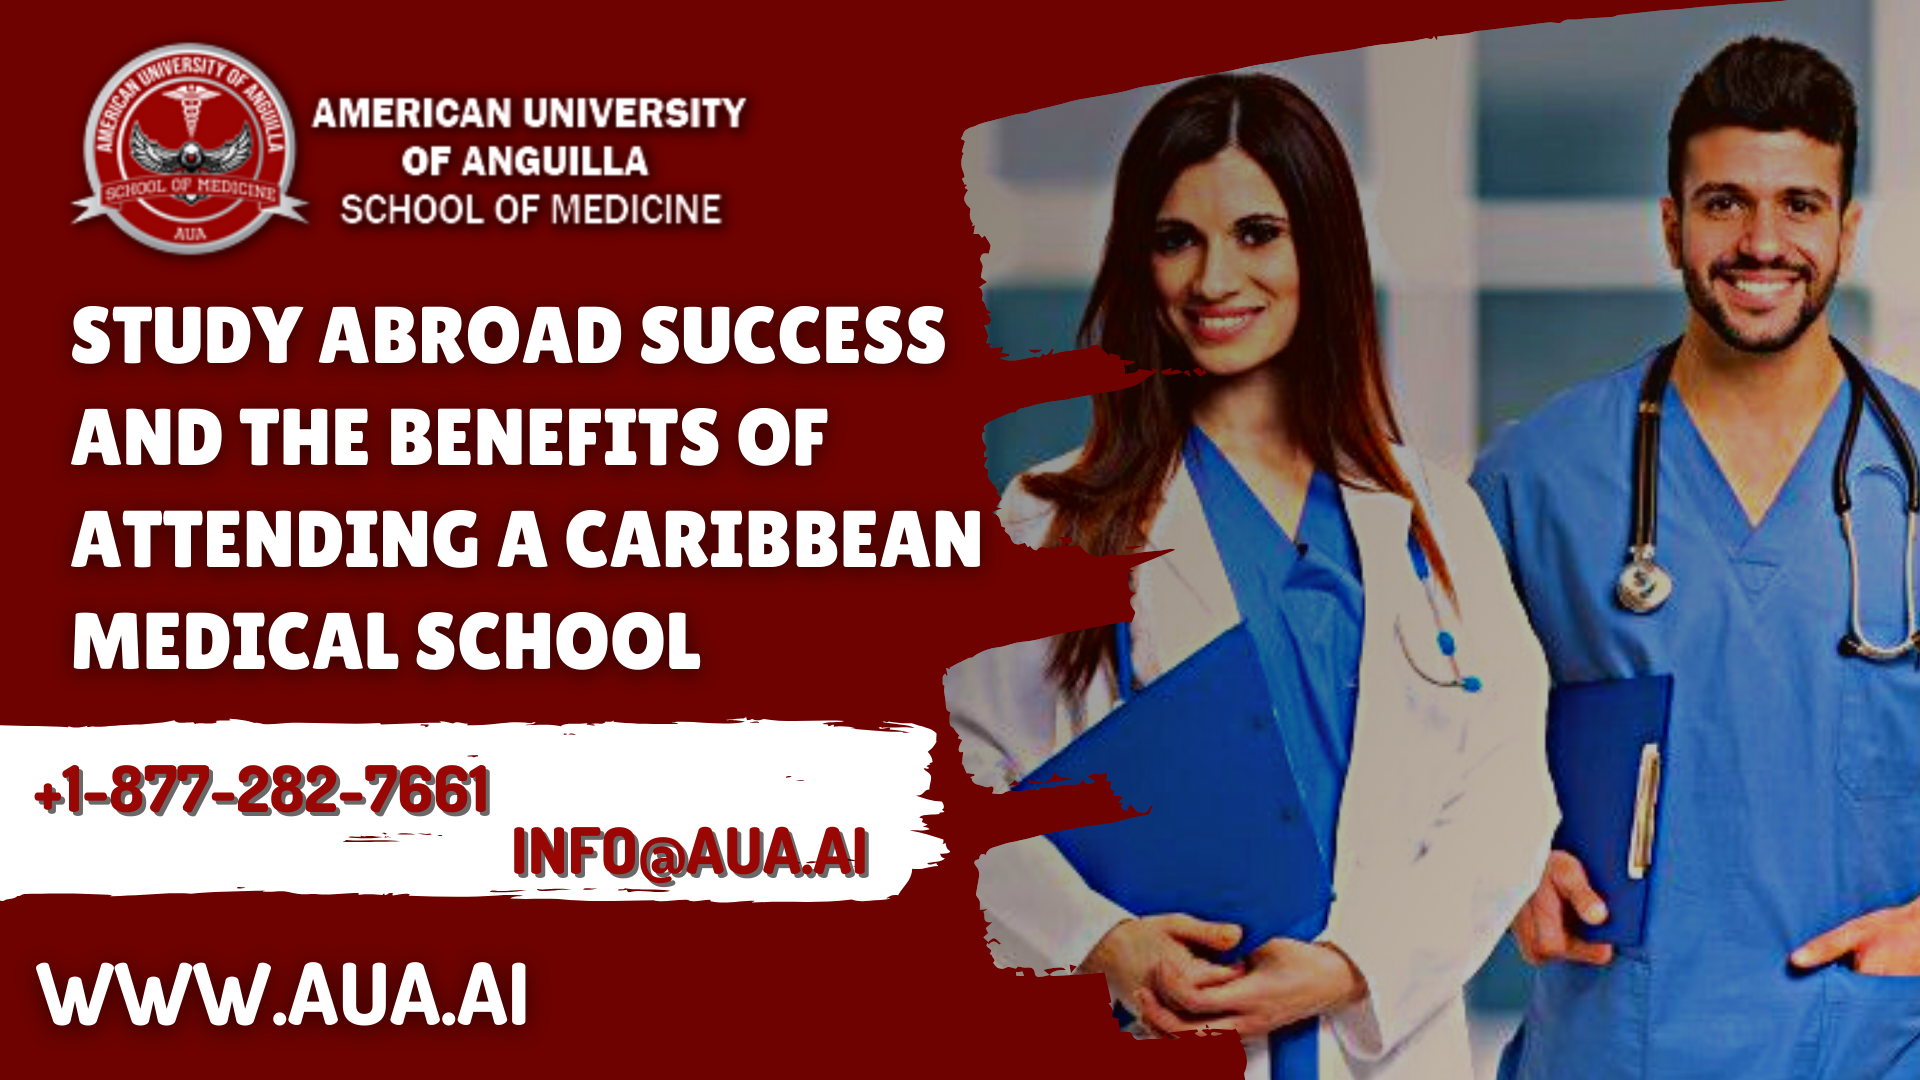 Study Abroad Success and the Benefits of Attending a Caribbean Medical School